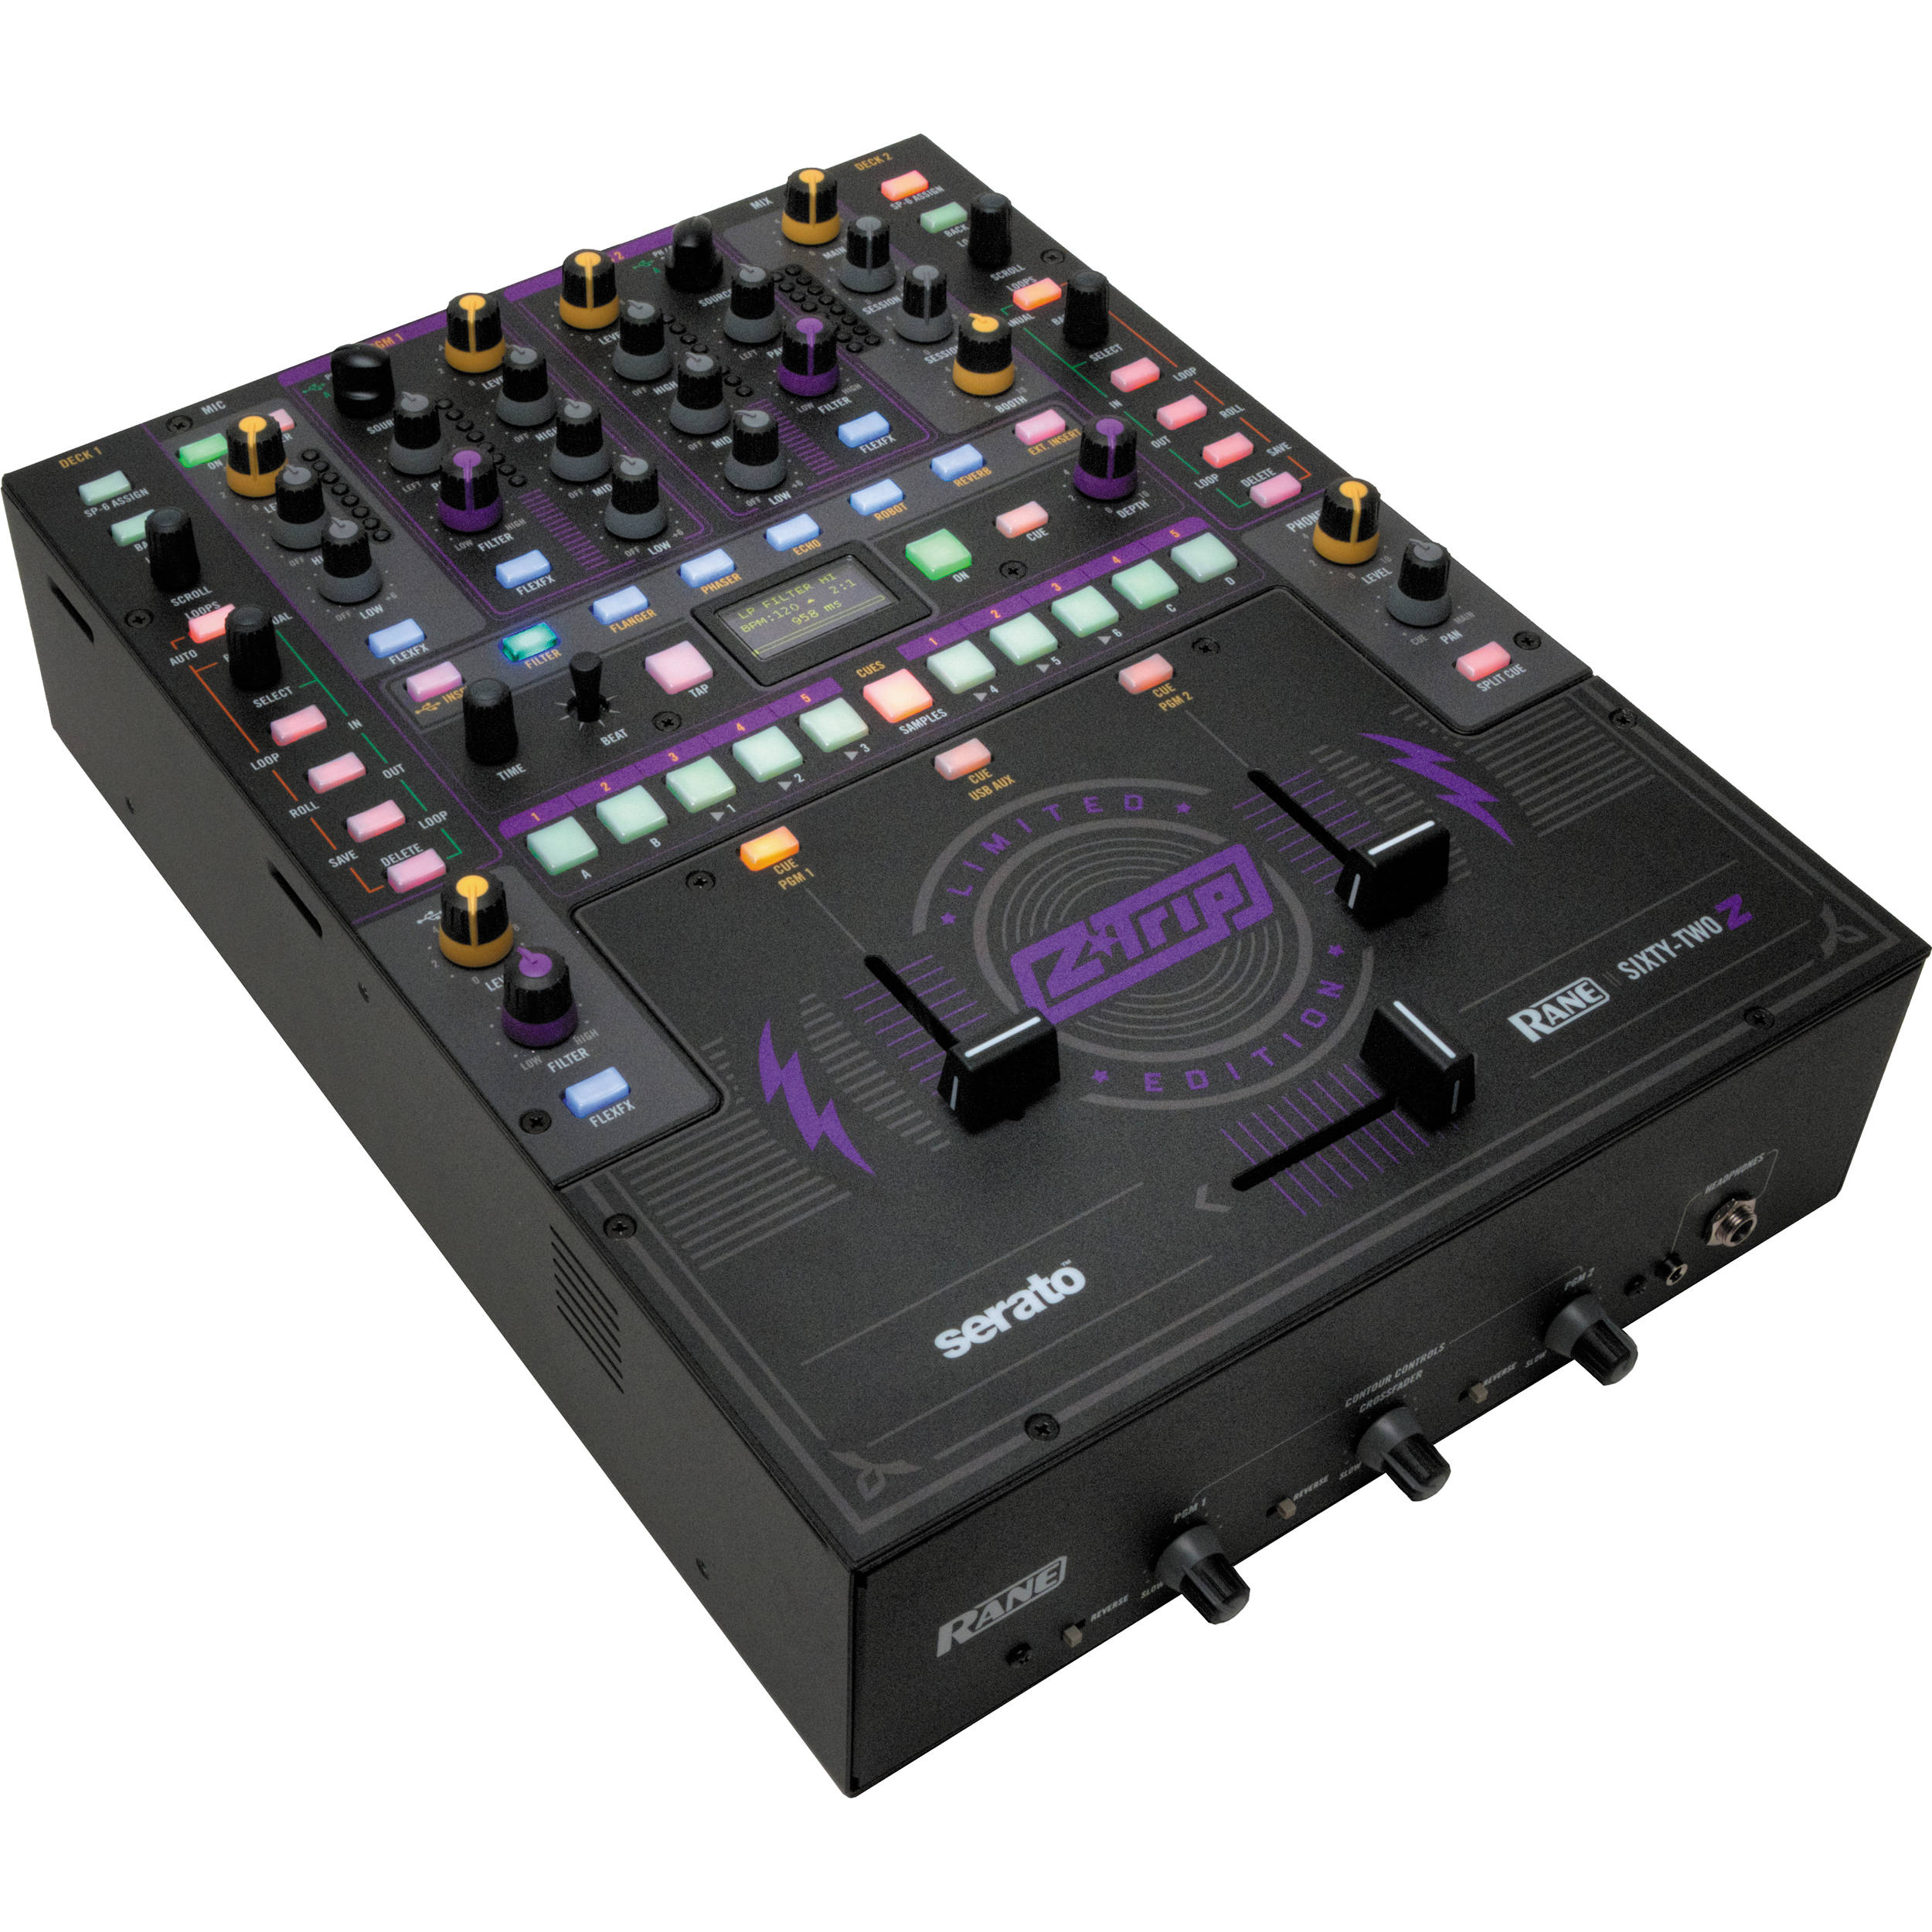 Best Mixer For Serato Scratch Live